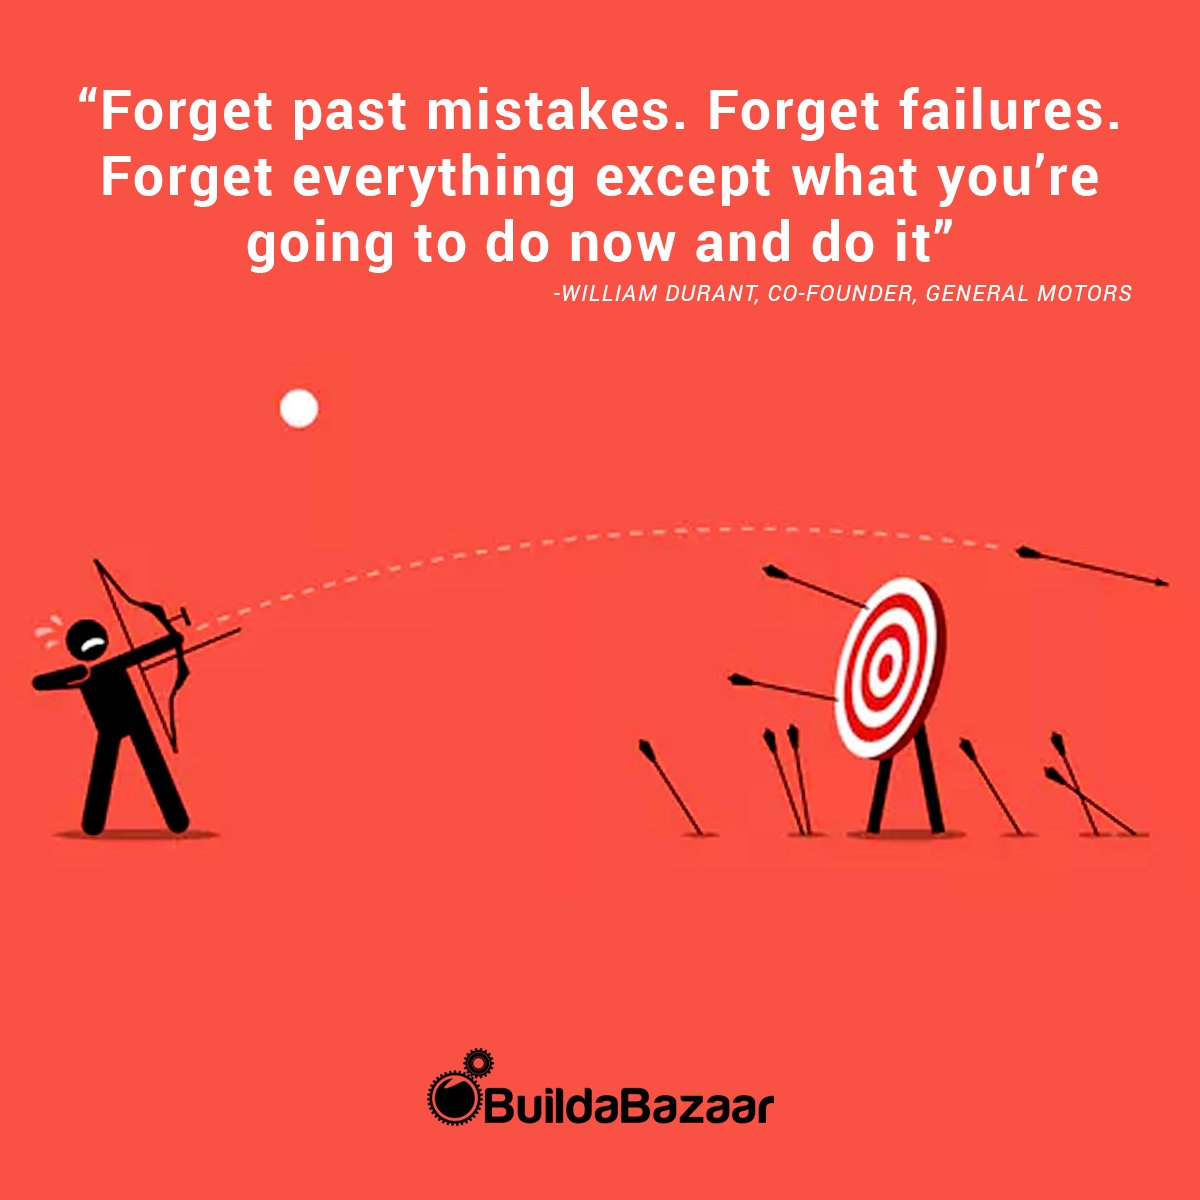 “Forget past mistakes. Forget failures. Forget everything except what you’re going to do now and do it.”
William Durant, co-founder of General Motors